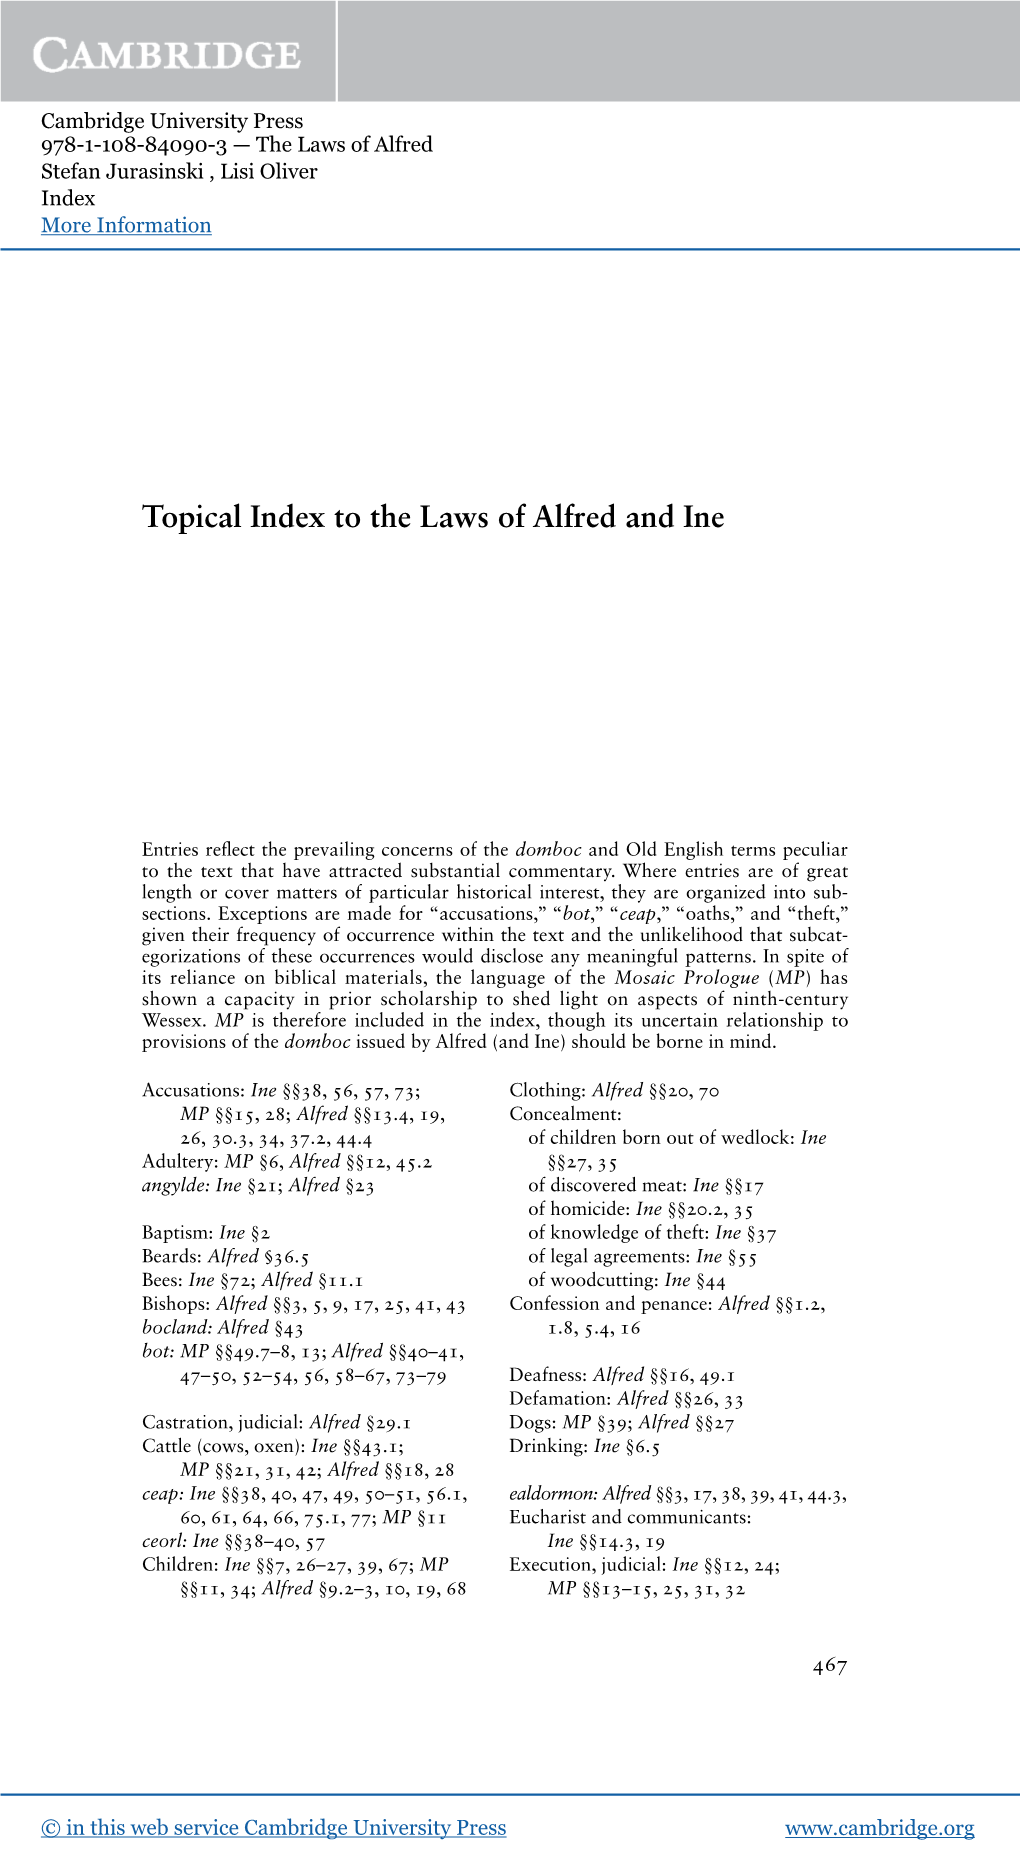 Topical Index to the Laws of Alfred and Ine